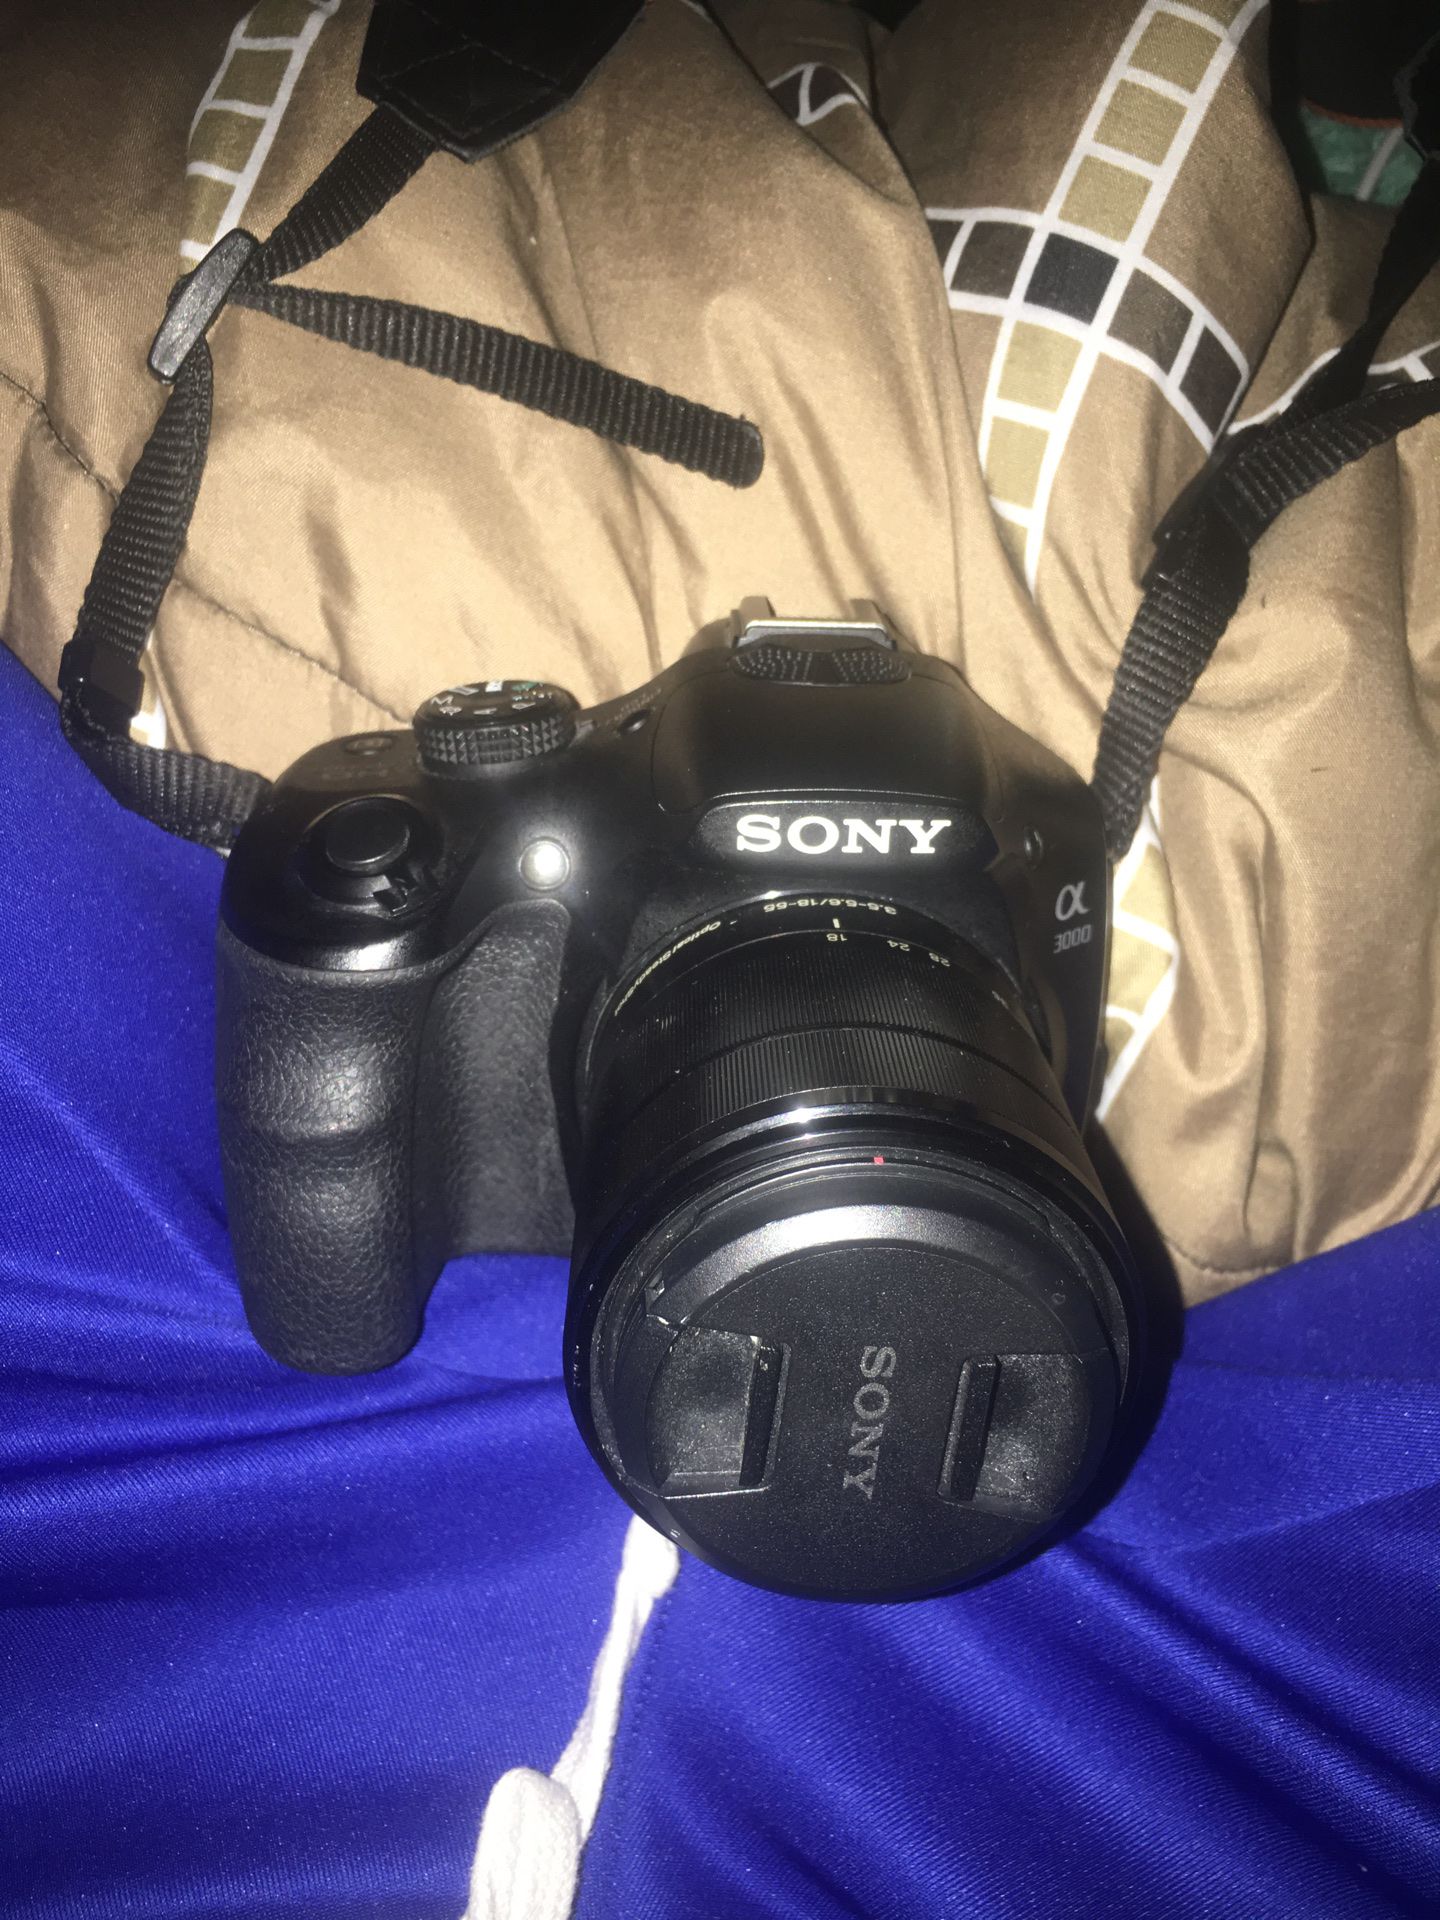 A Sony hd cx 3000 camera in great condition opened but never used it had it for about 2 months